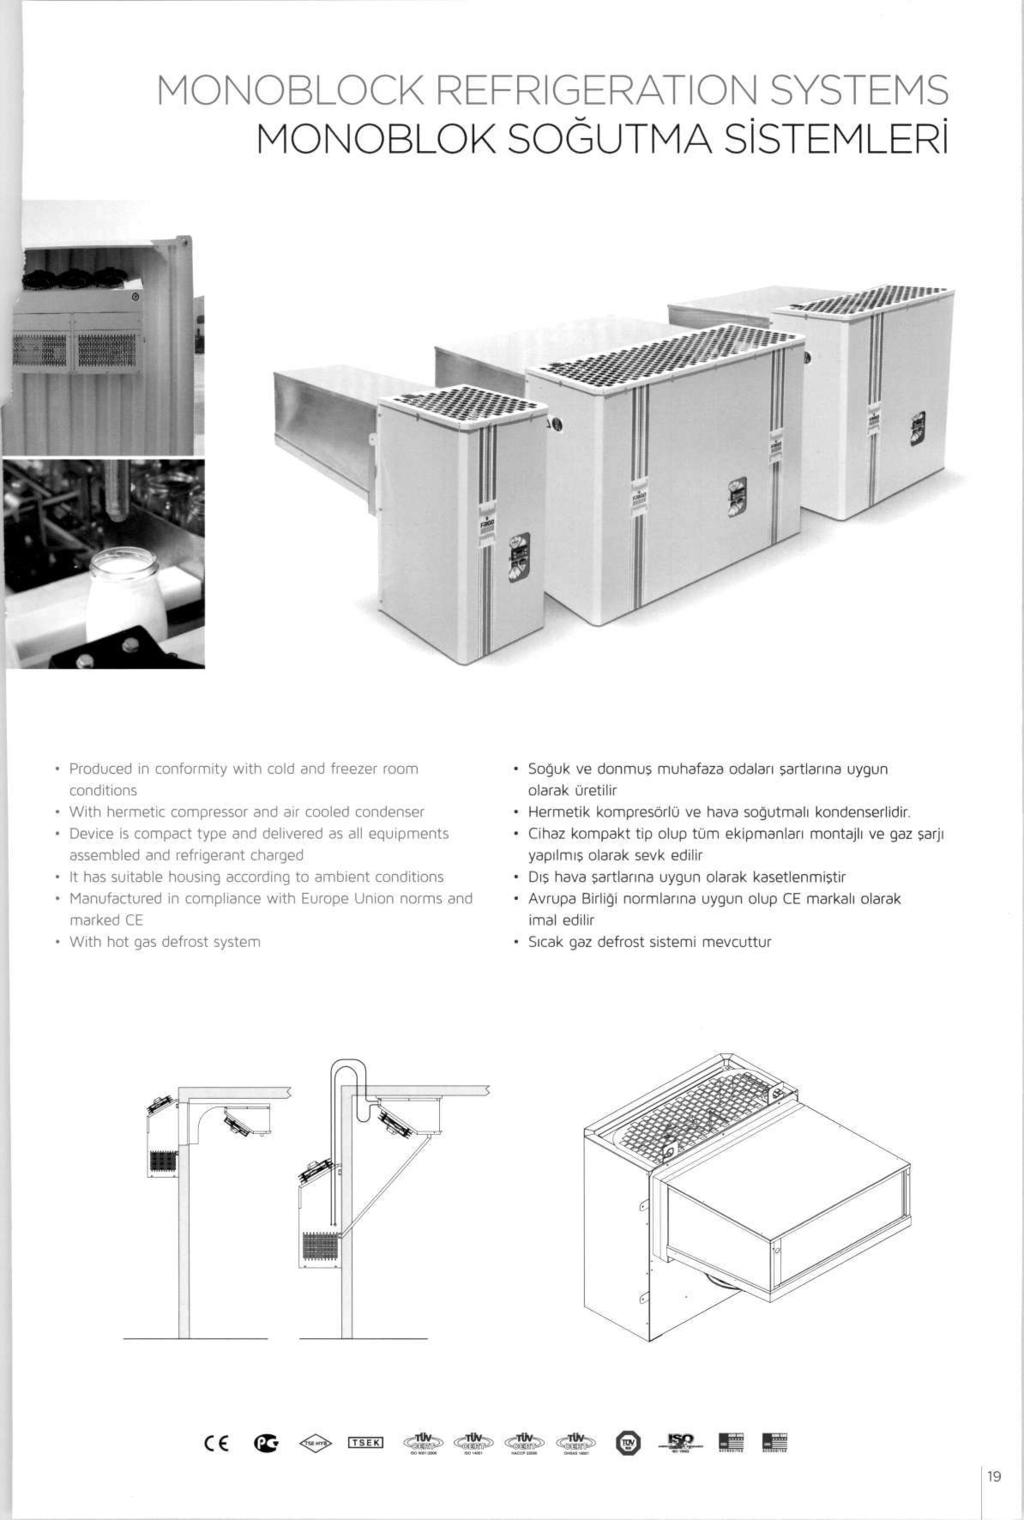 MONOBLOCK REFRIGERATION SYSTEMS MONOBLOK SOGUTMA SiSTEMLERi ^л «atf P* У Produced in conformity with cold and freezer room conditions With hermetic compressor and air cooled condenser Device is